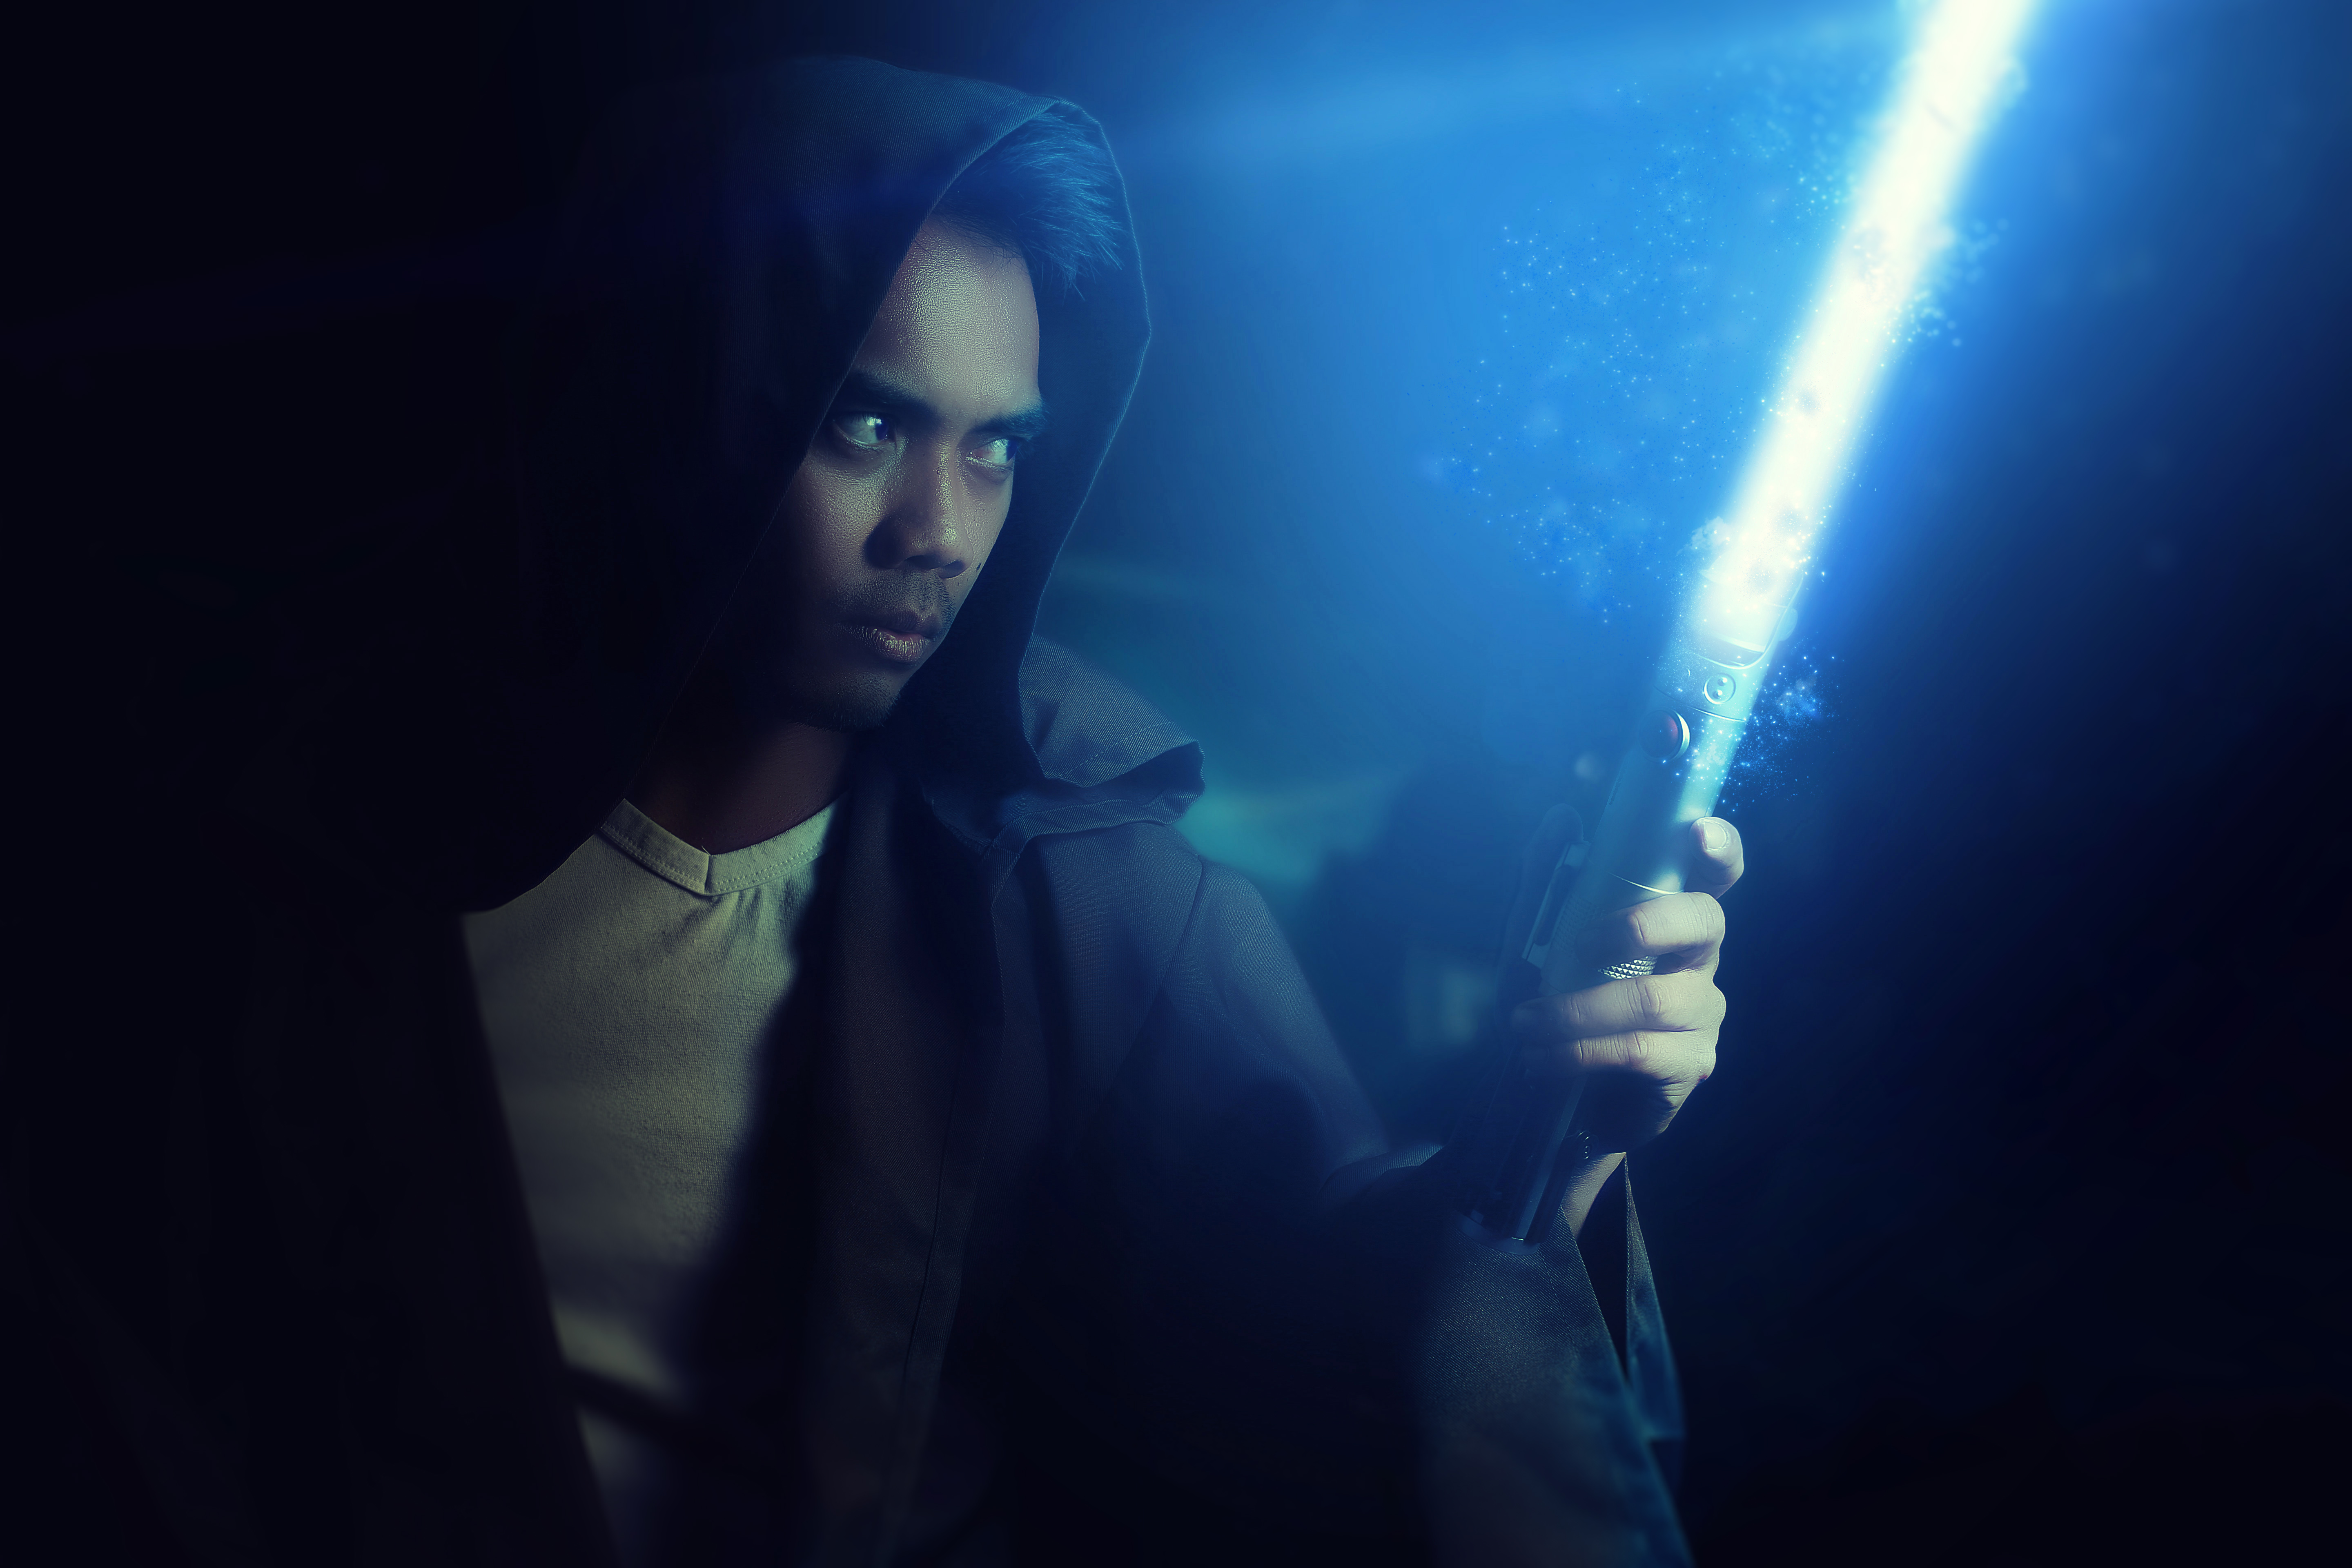 Young warrior holding a lightsaber on a dark background